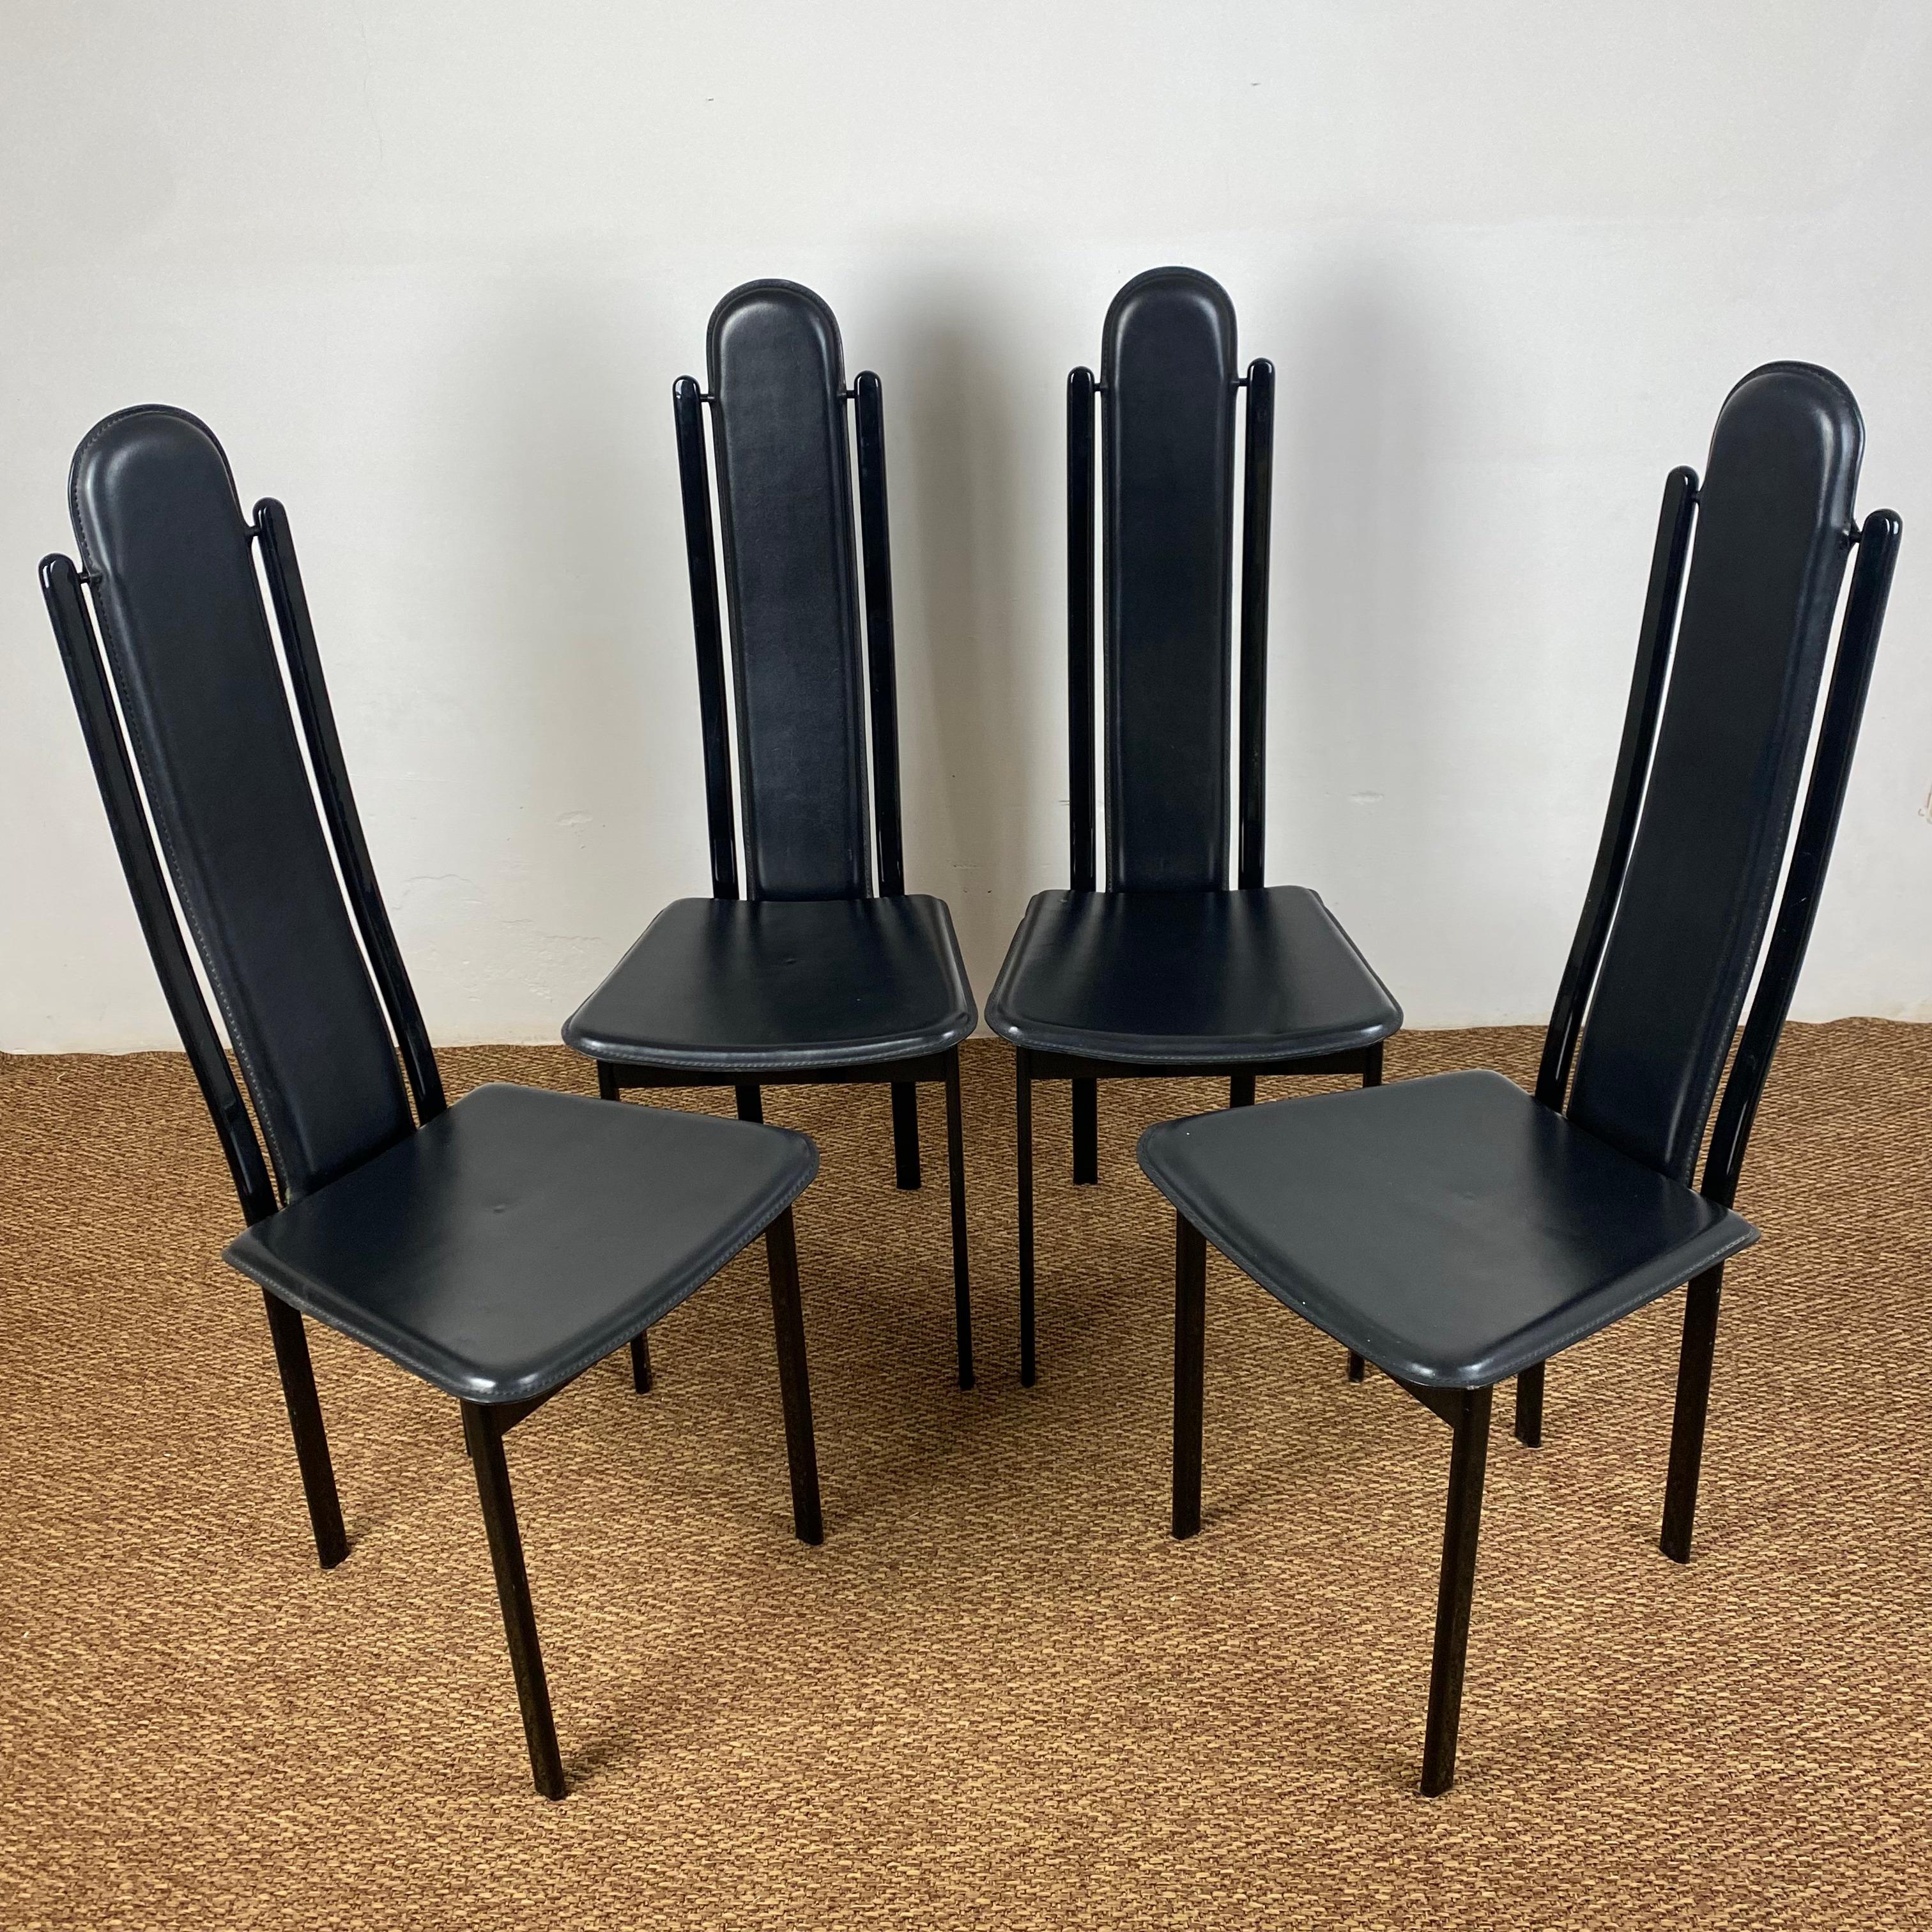 Set composed of four particular post-modern chairs made of leather and painted steel.

The chairs are in perfect condition with some small signs of wear, as shown in the photographs.

Production Recanatini, Italy, 1970-1980

Dimensions: